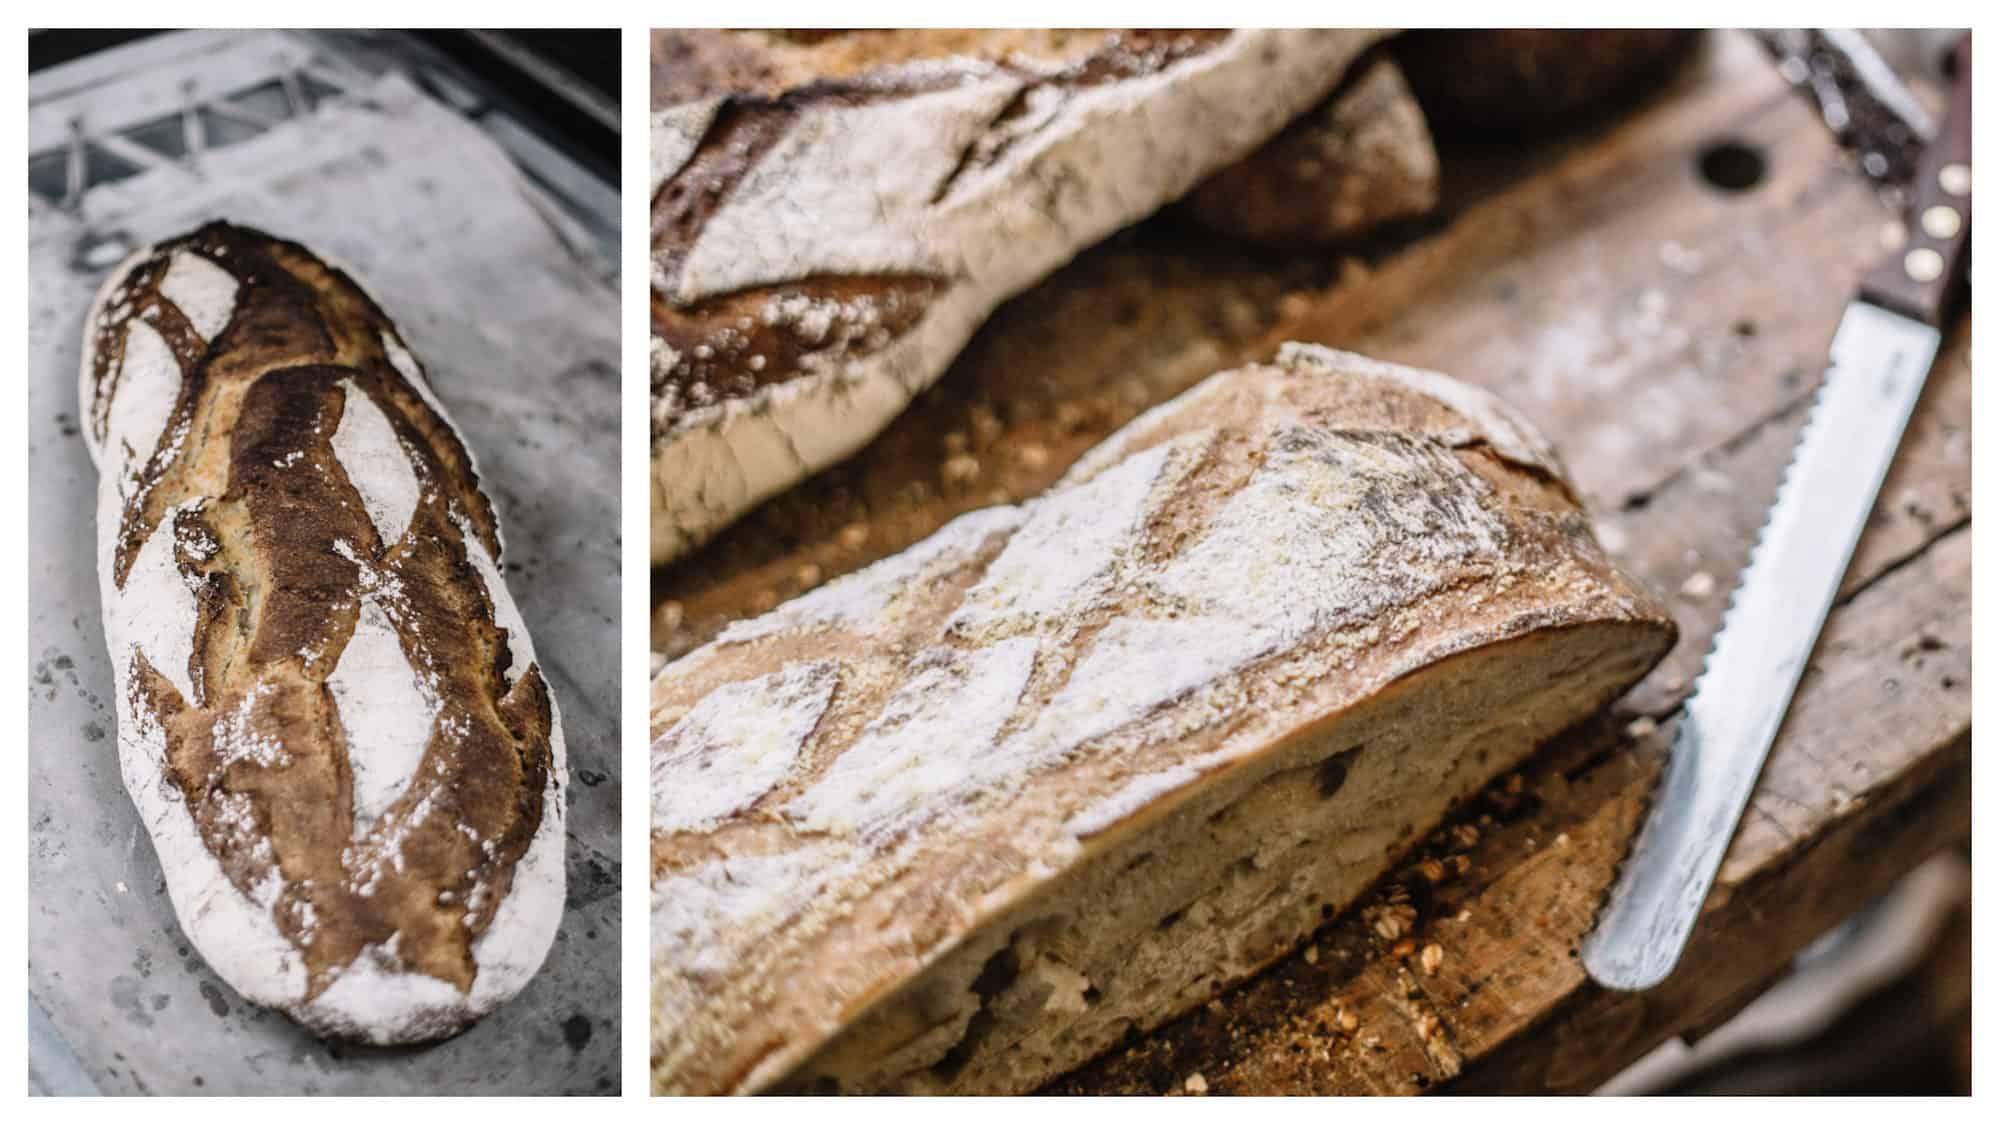 Mamiche is one of our favorite bakeries in Paris' South Pigalle neighborhood for its crusty home-baked loaves of bread.